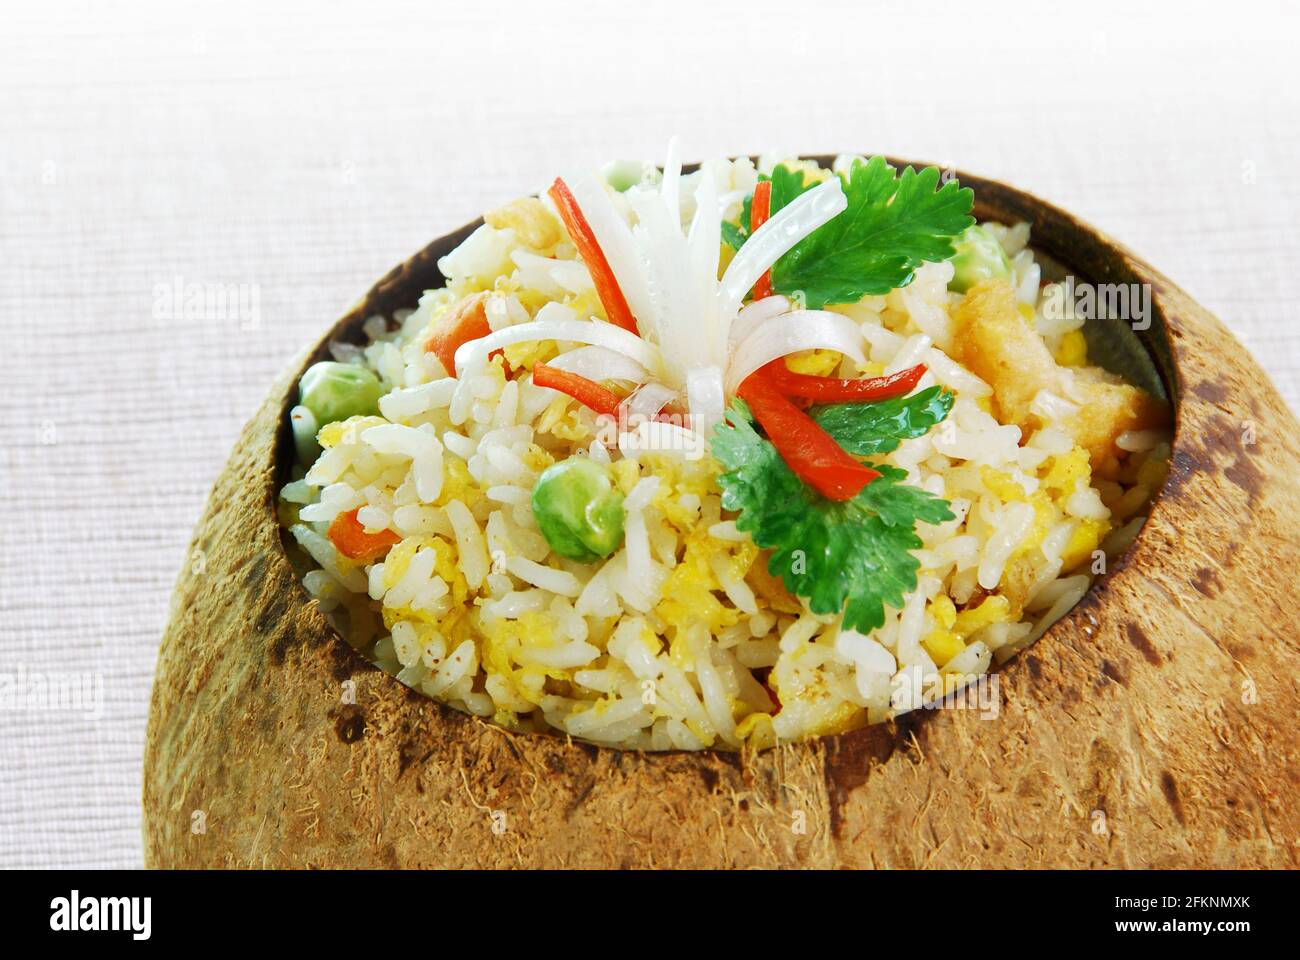 Fried rice in coconut shell Stock Photo